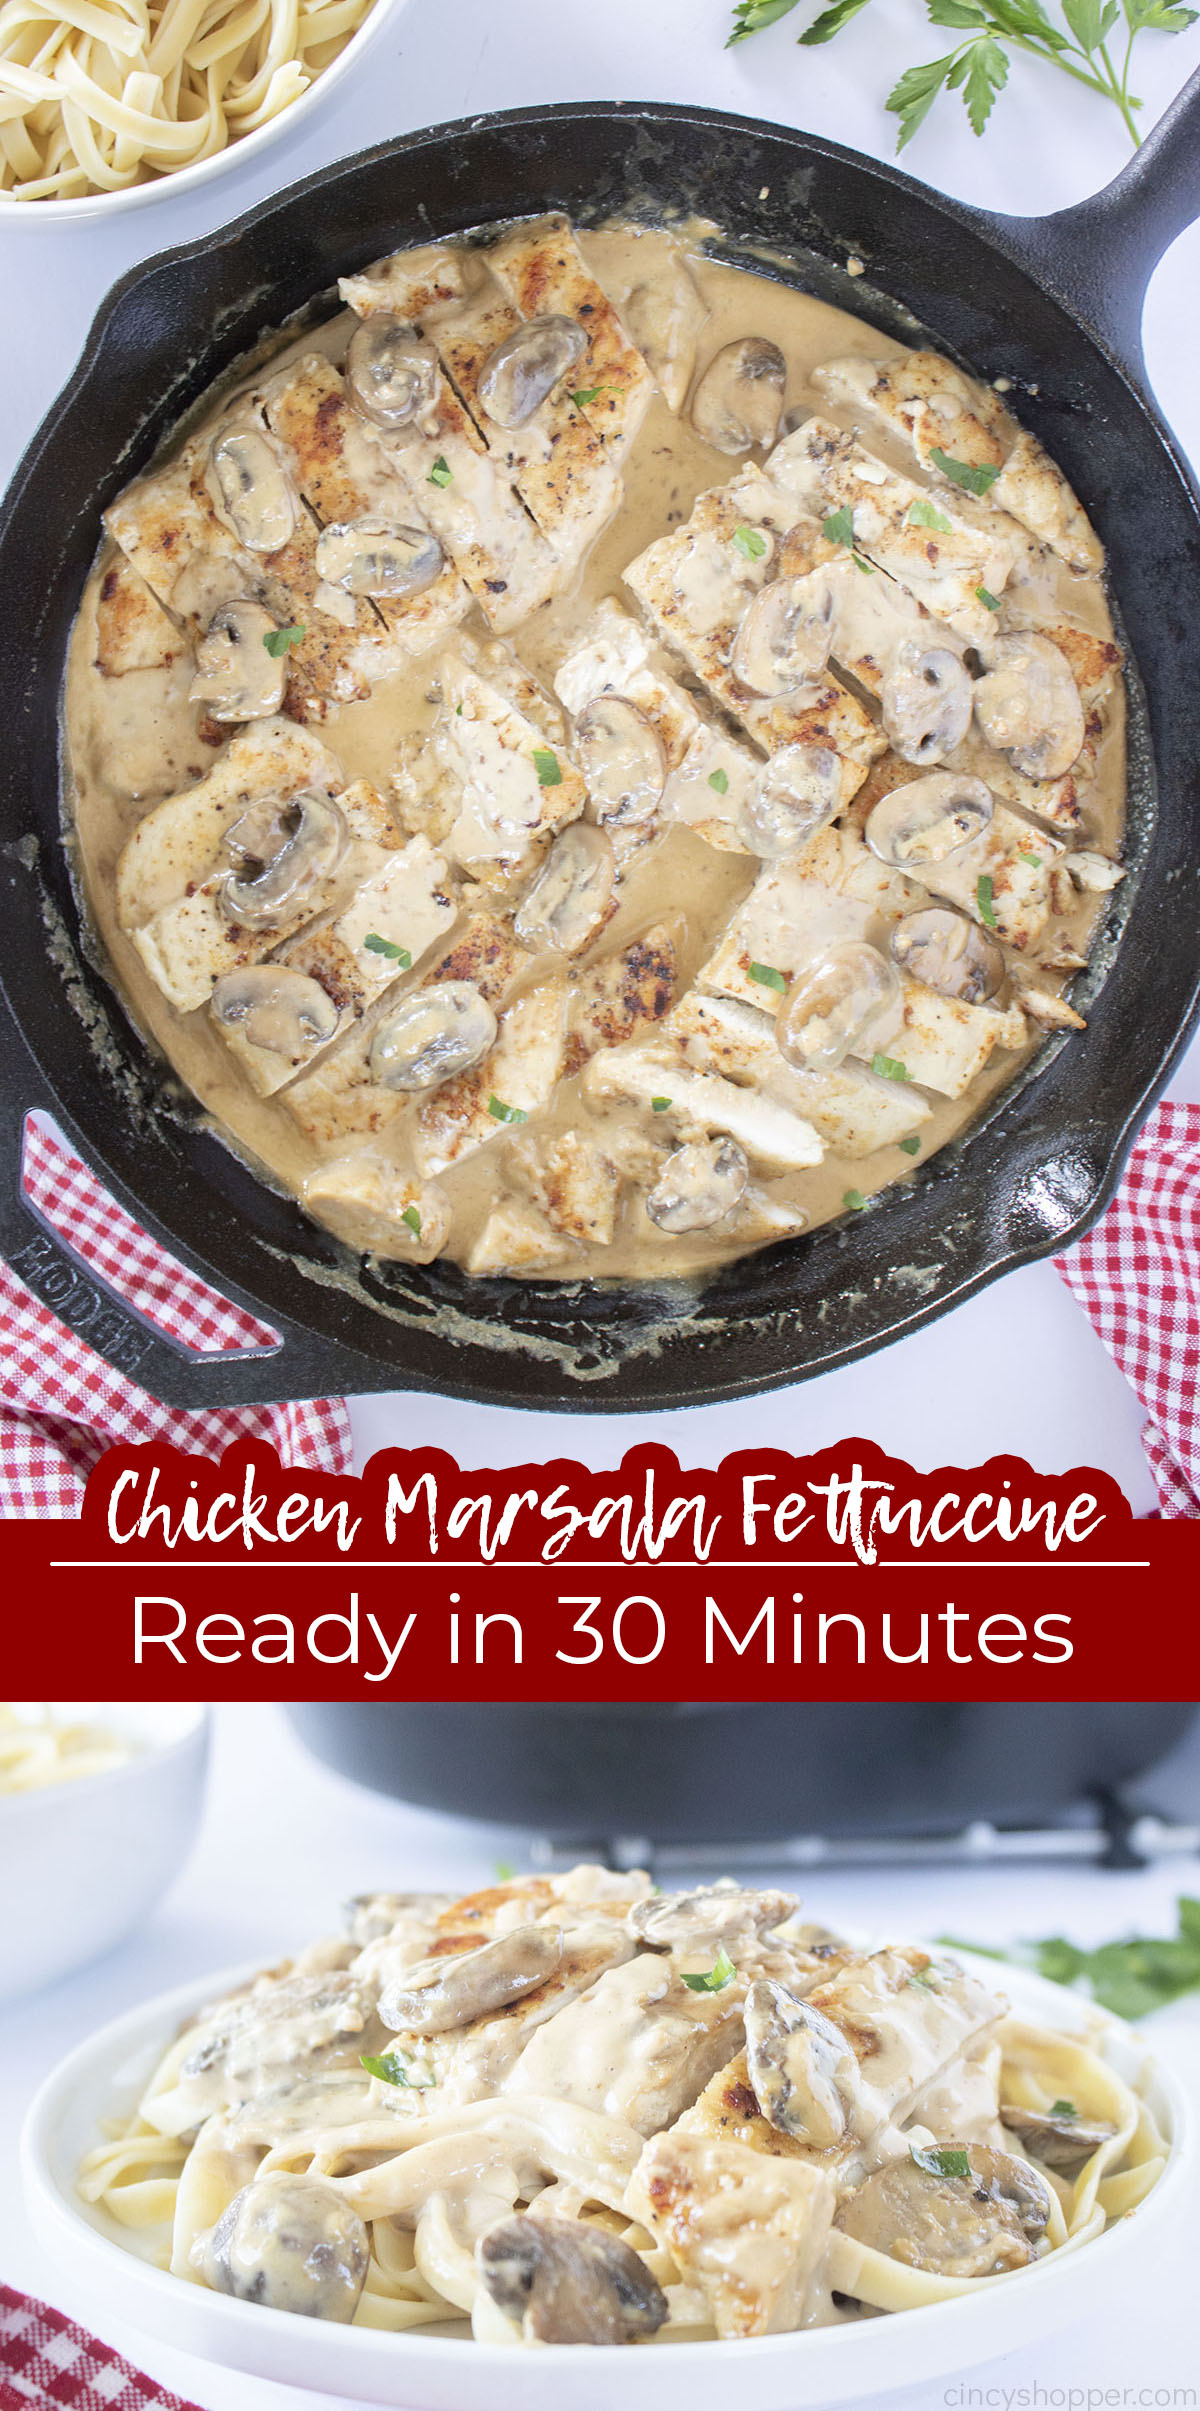 Long Pin Text on image Chicken Marsala Fettuccine Ready in 30 Minutes.